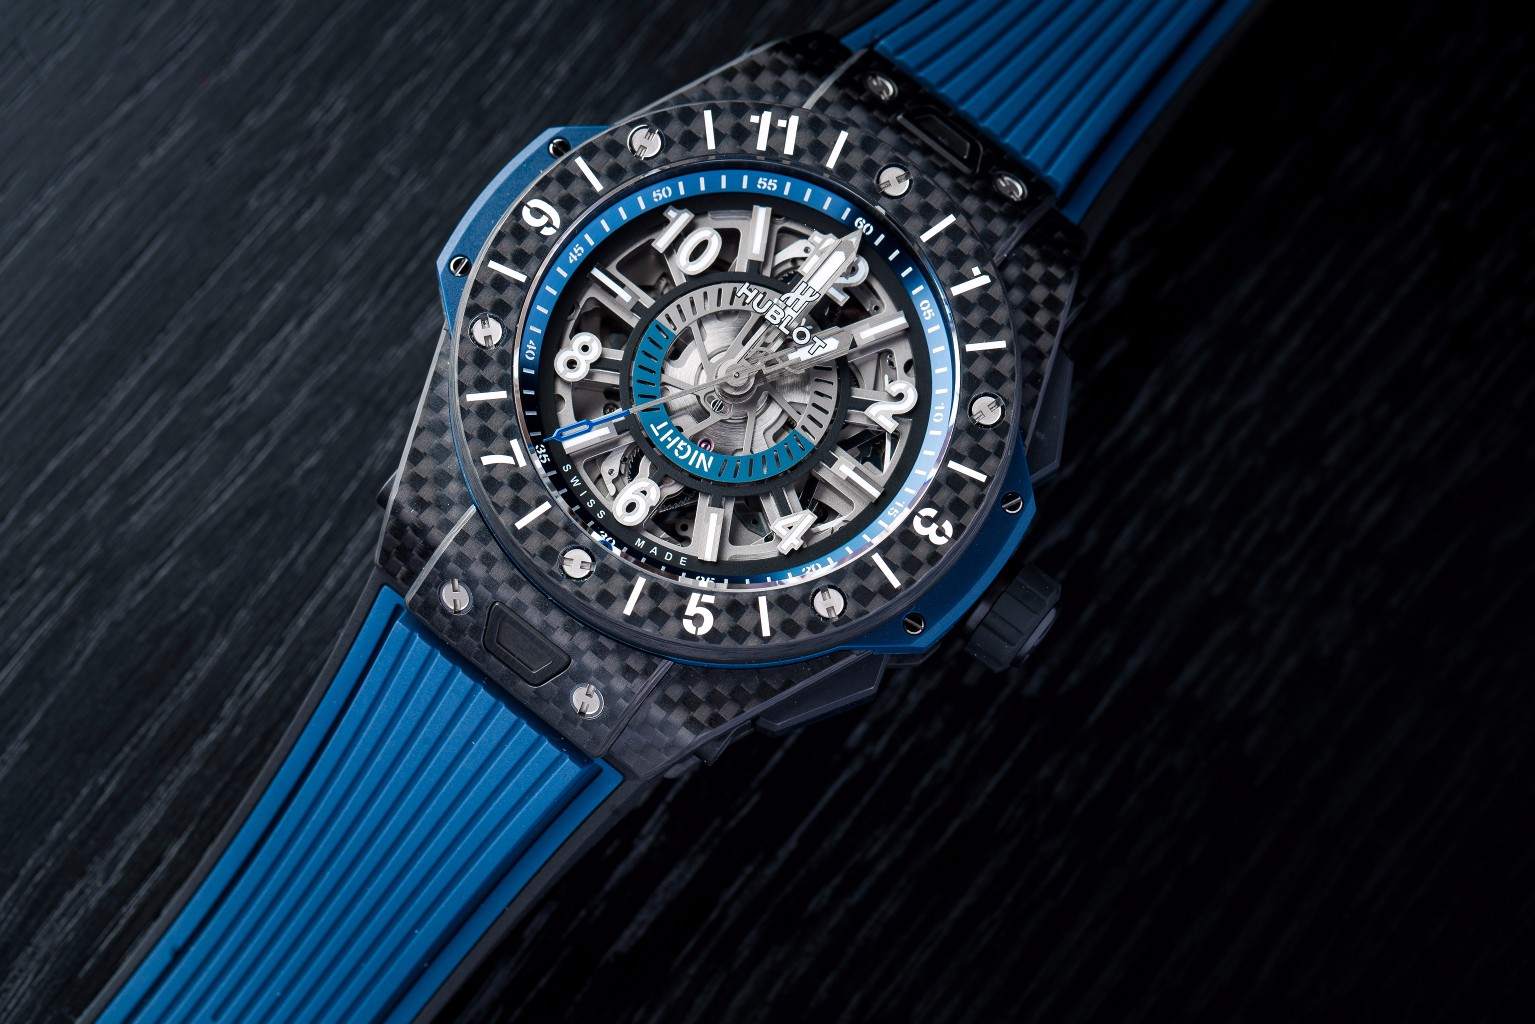 The Hublot Big Bang Unico Now With GMT Function